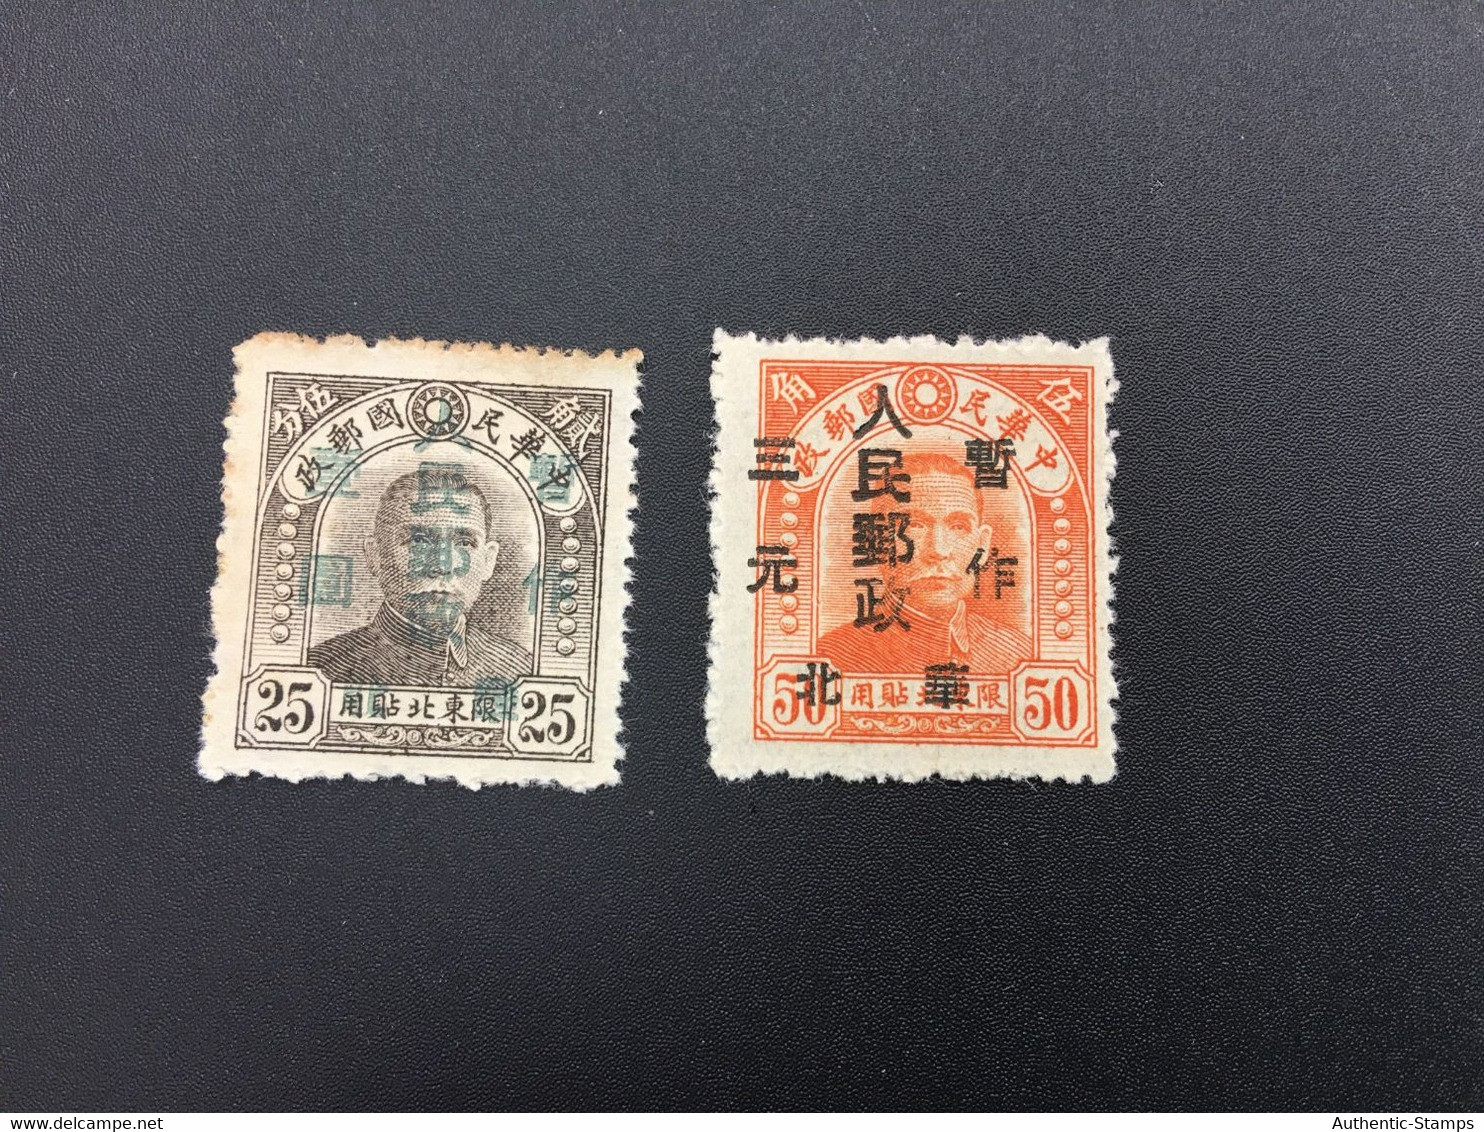 CHINA STAMP, SET, LIBERATED AREA, UNUSED, TIMBRO, STEMPEL, CINA, CHINE, LIST 6327 - Chine Du Nord 1949-50